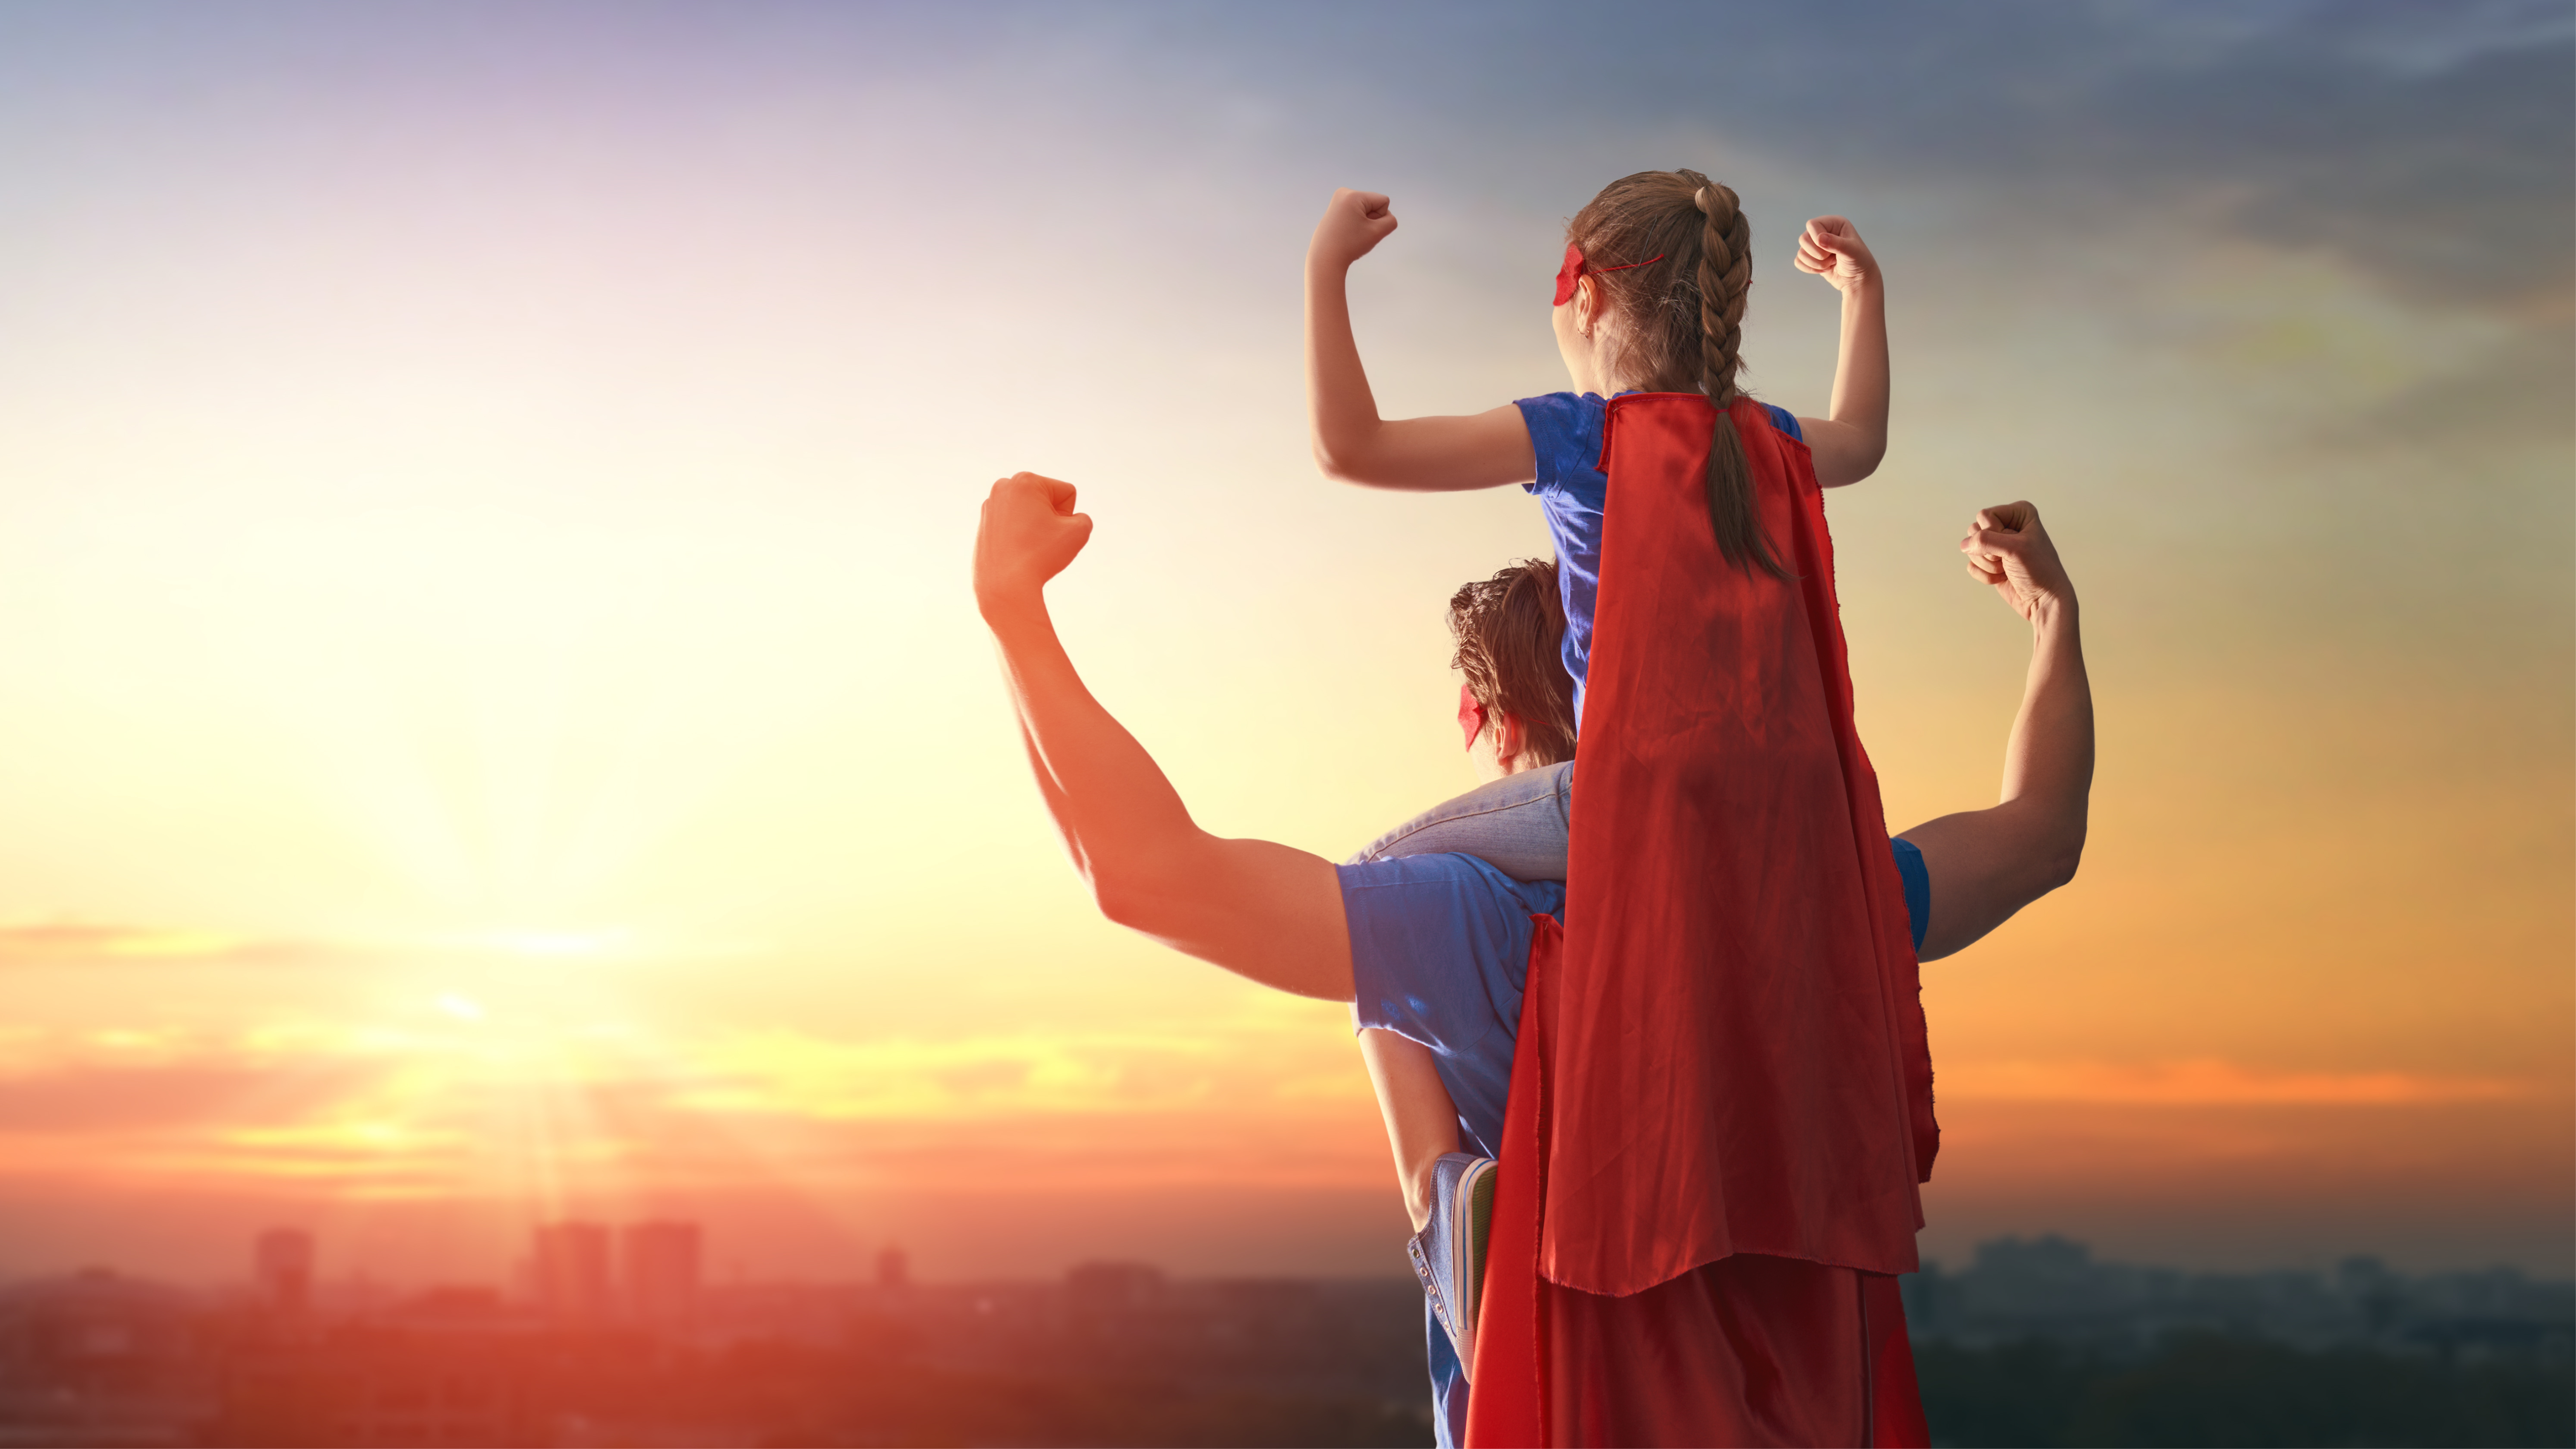 Fathers day image showcasing a superhero dad and his daughter